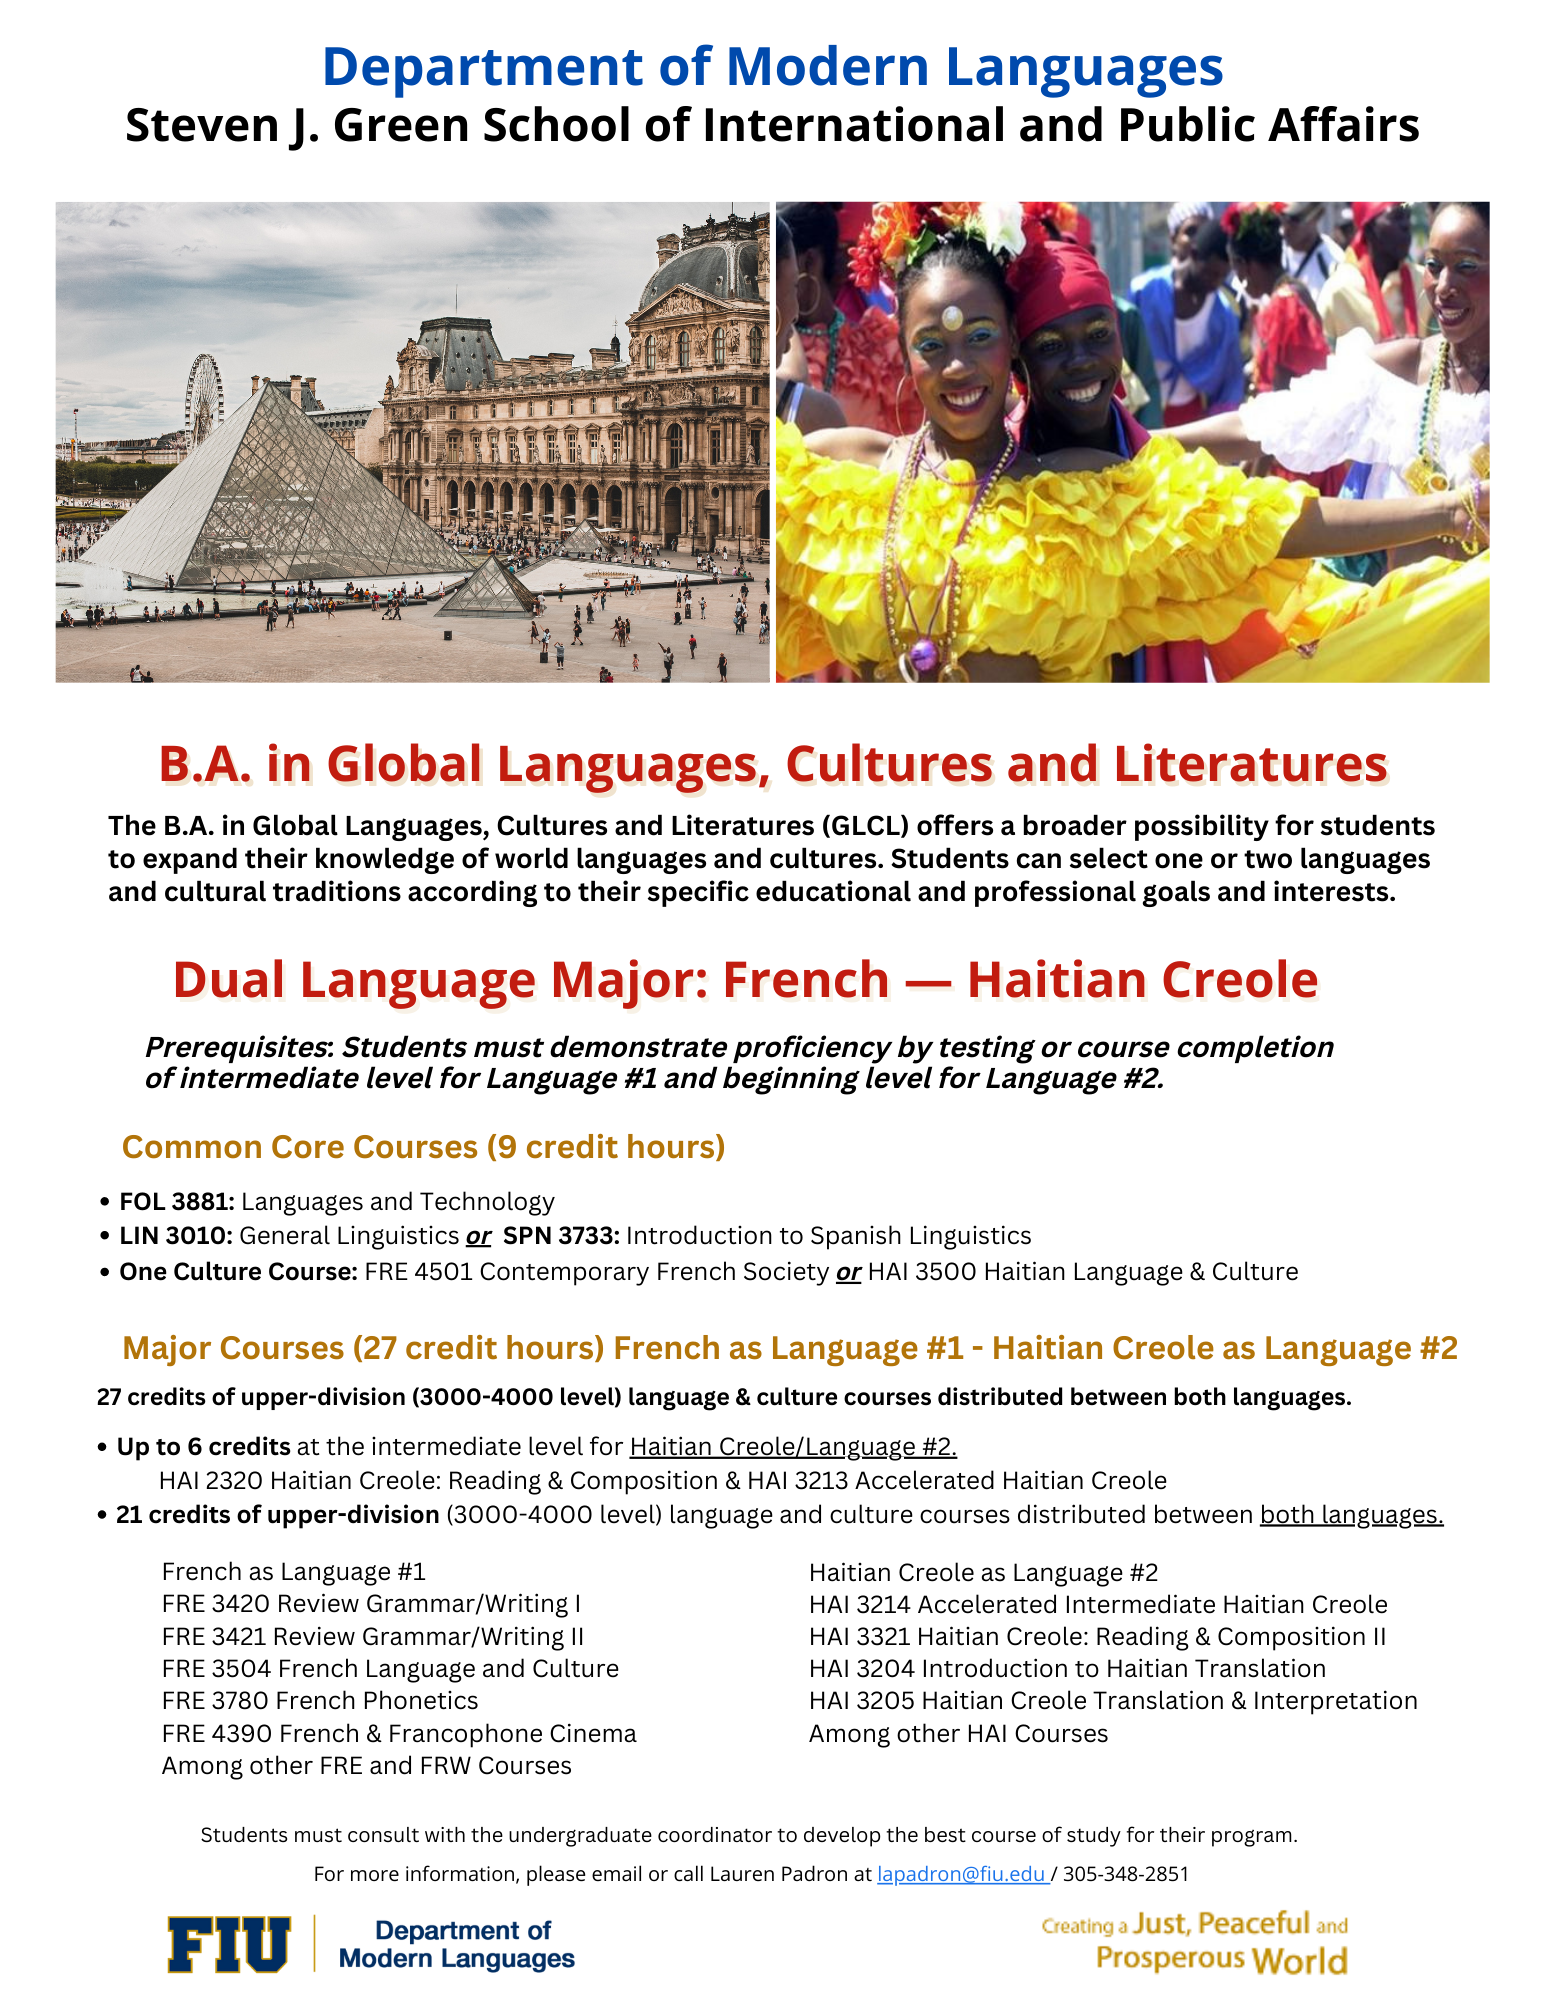 frenchhaitian-creole-flyer.png